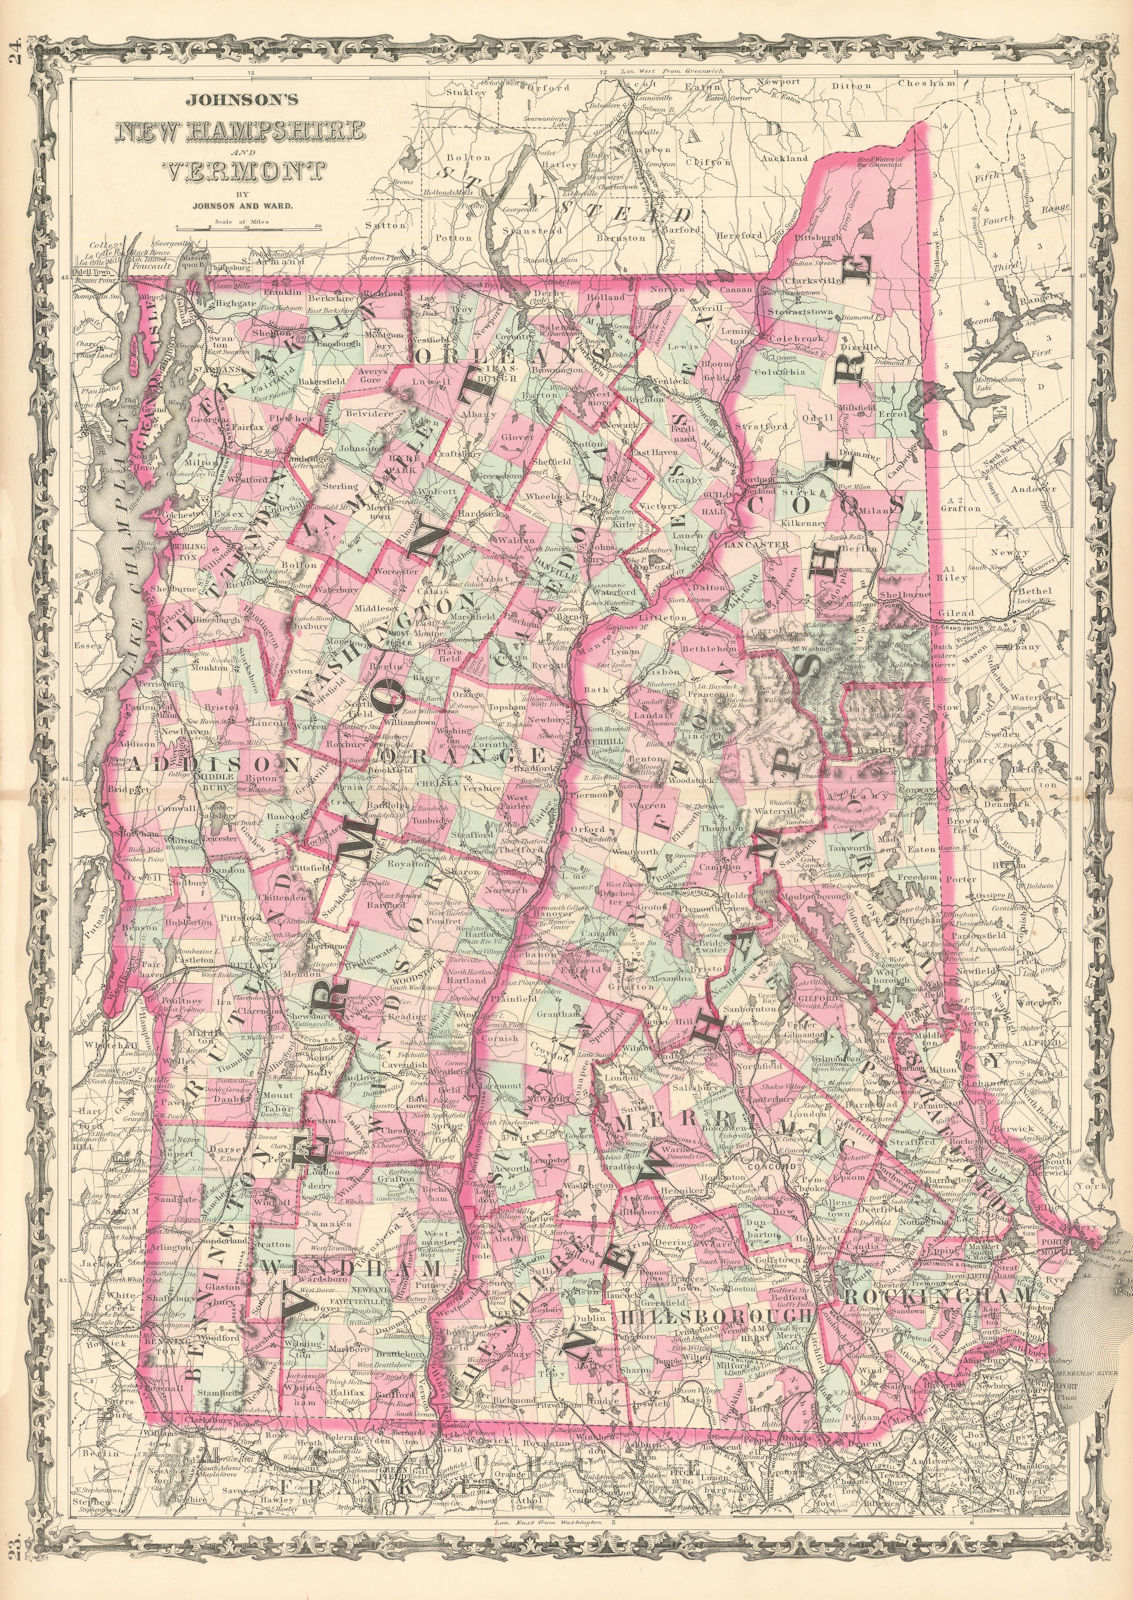 Associate Product Johnson's New Hampshire & Vermont. US State map showing counties 1863 old